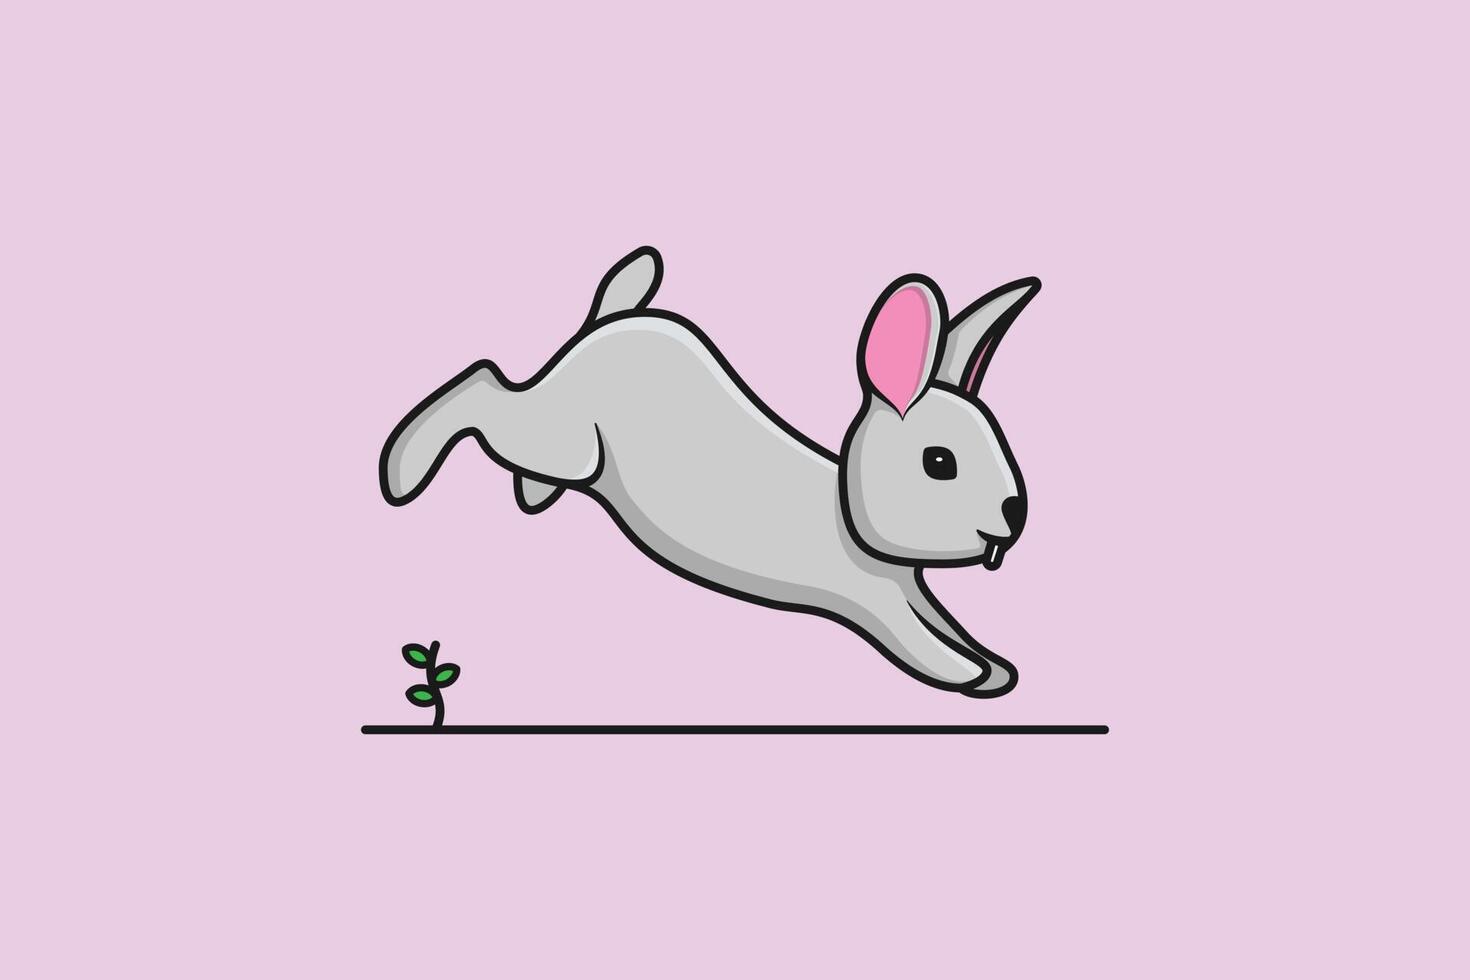 Cute Baby Rabbit Standing cartoon vector illustration. Animal nature icon concept. Funny furry white hares, Easter bunnies jumping vector design with shadow. Fast running zoo animal rabbit logo icon.